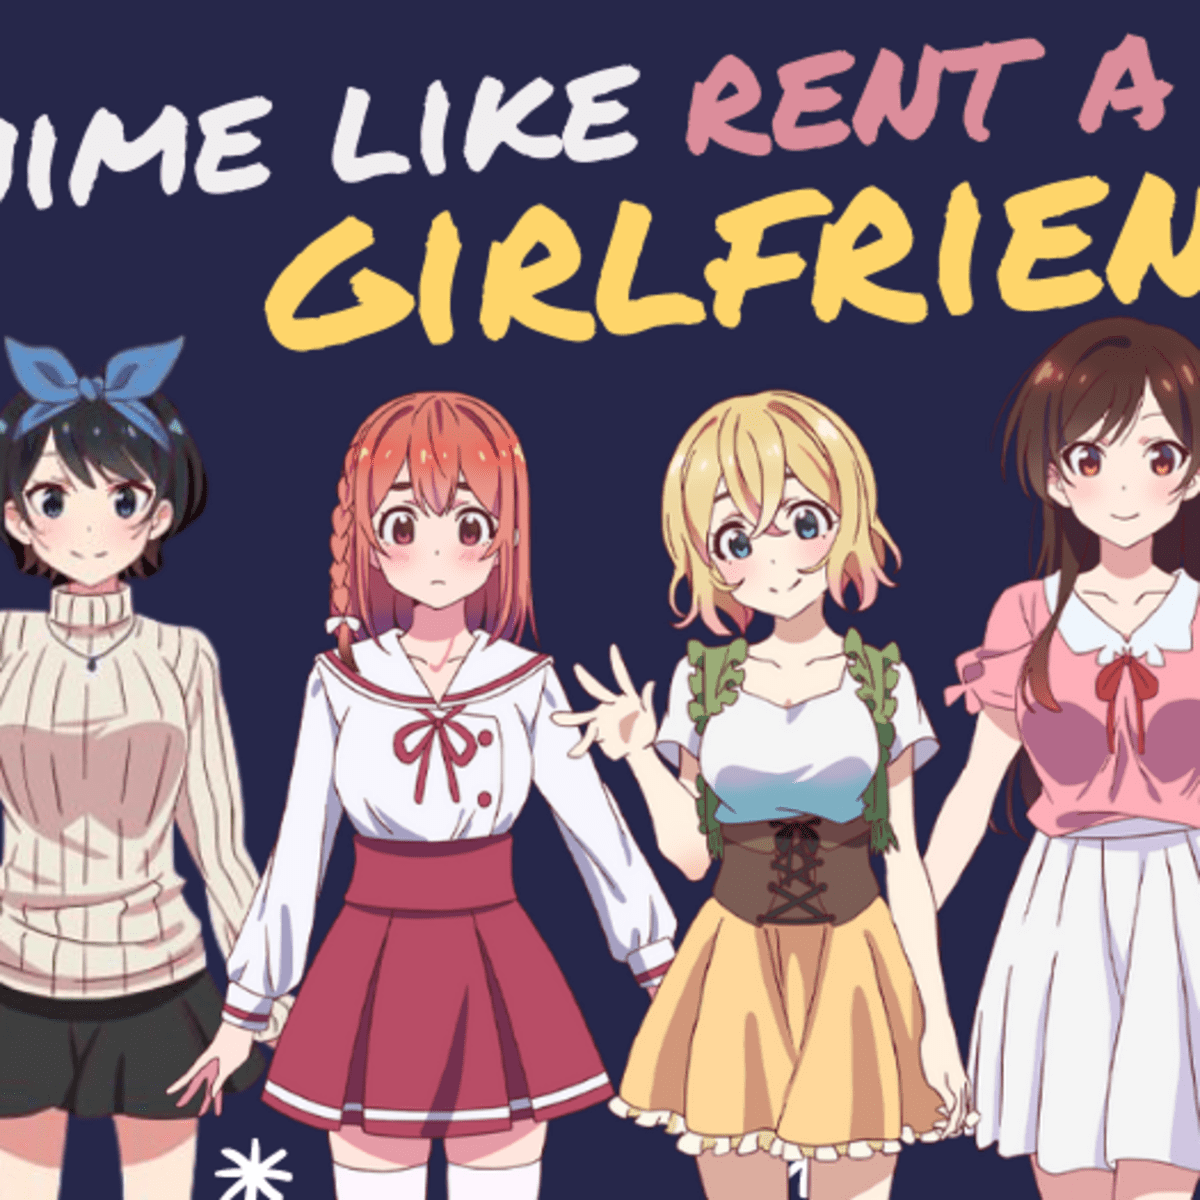 10 Anime Like “Rent-a-Girlfriend” You Shouldn't Miss - HubPages